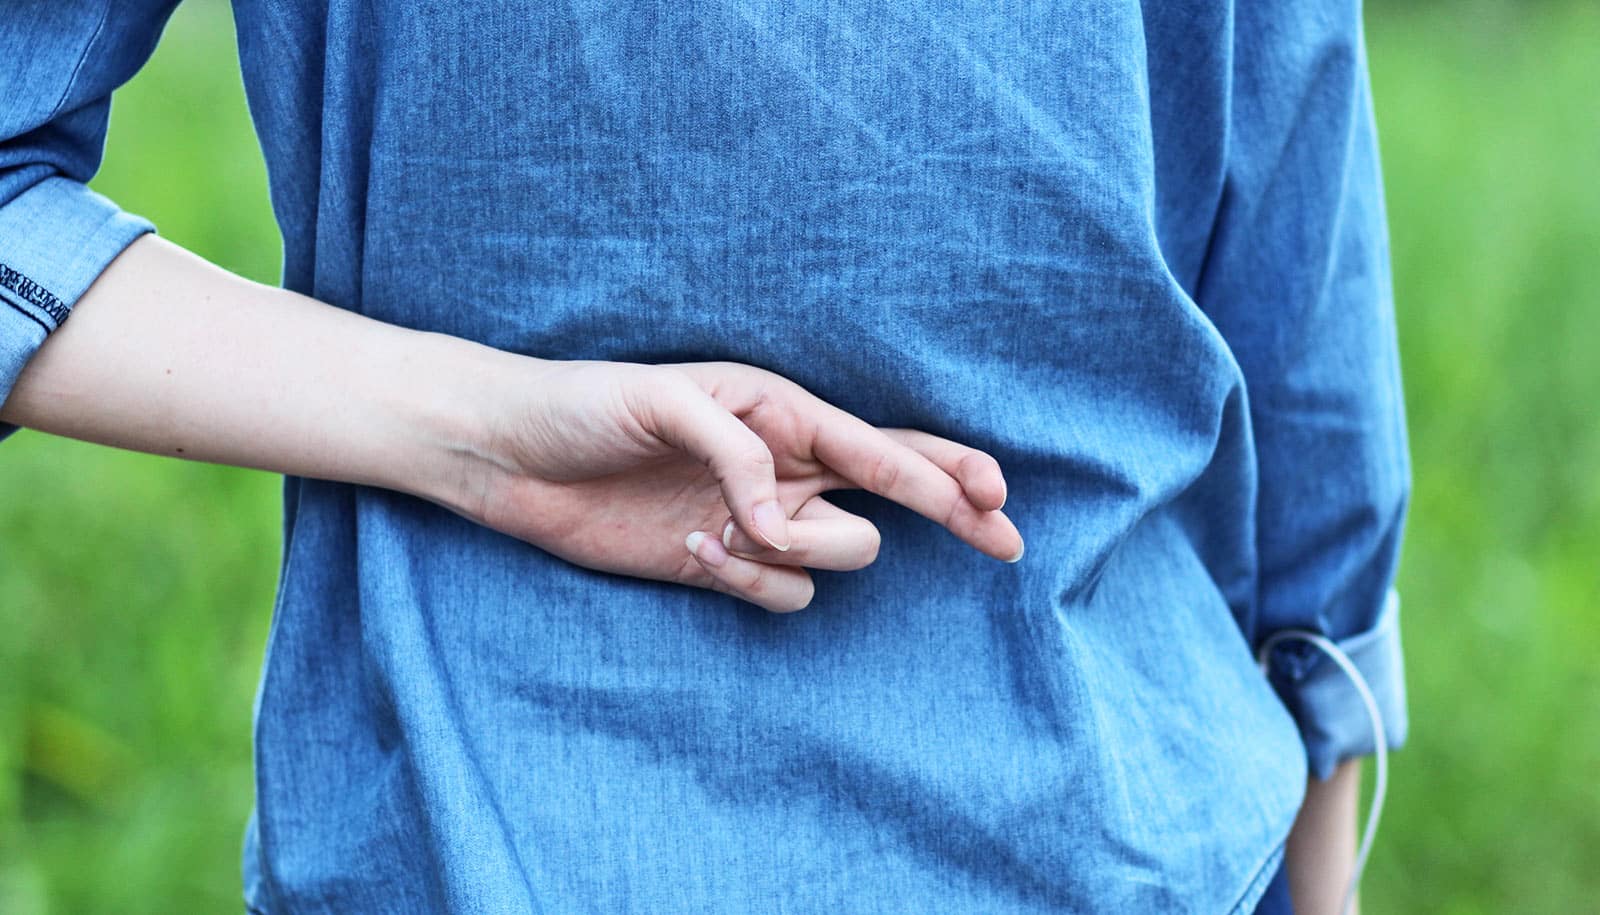 A woman in a blue shirt crosses her fingers behind her back.